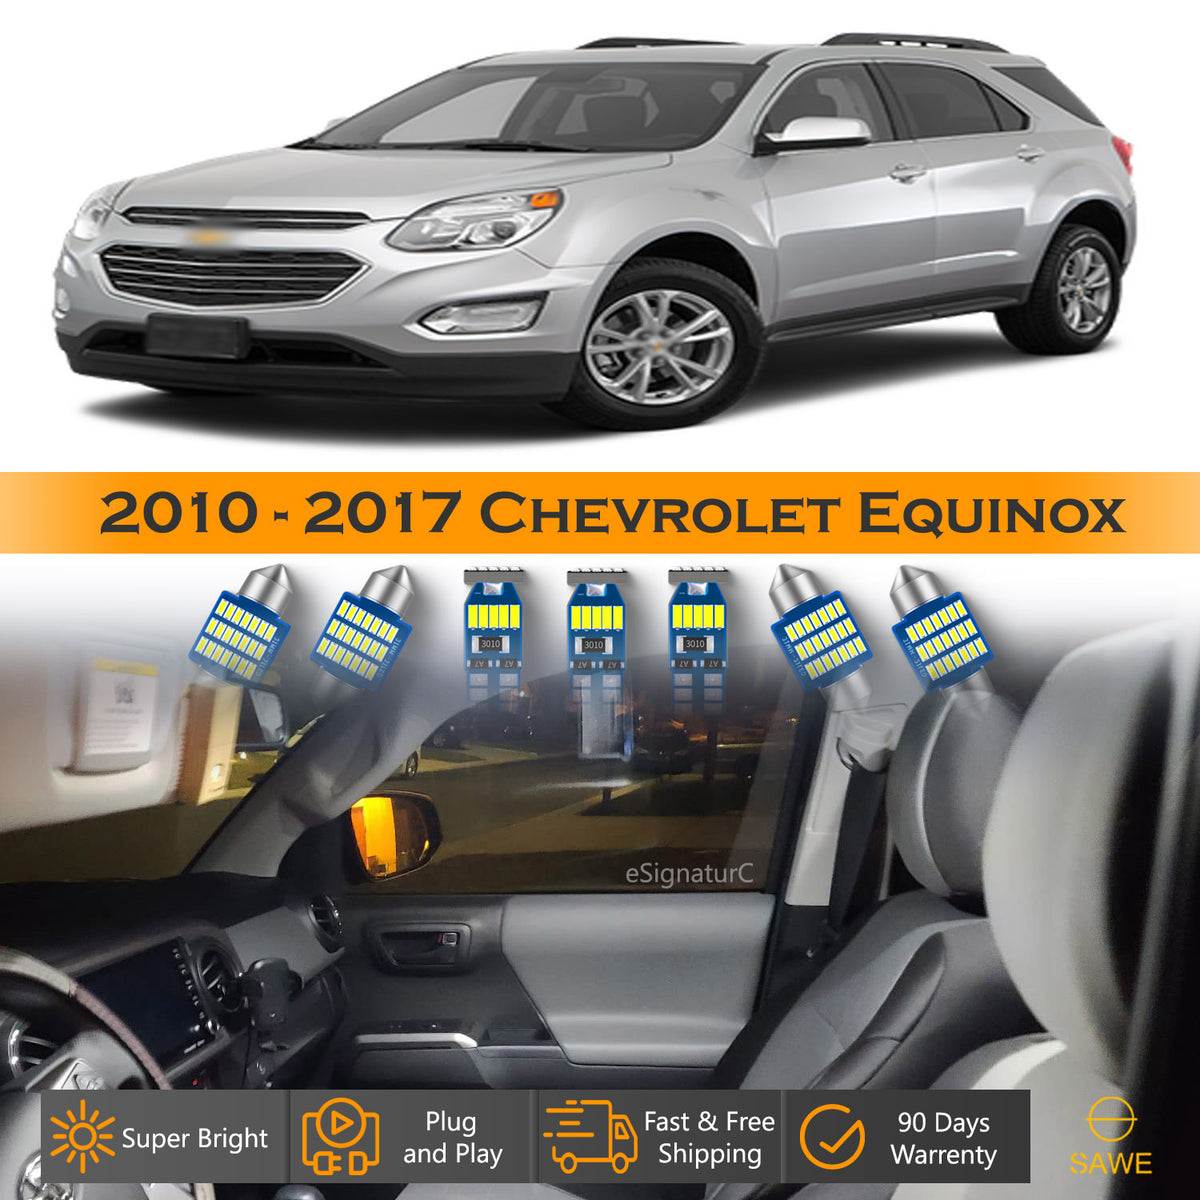 For Chevrolet Equinox Interior LED Lights - Dome & Map Lights Package Kit for 2010 - 2017 - White